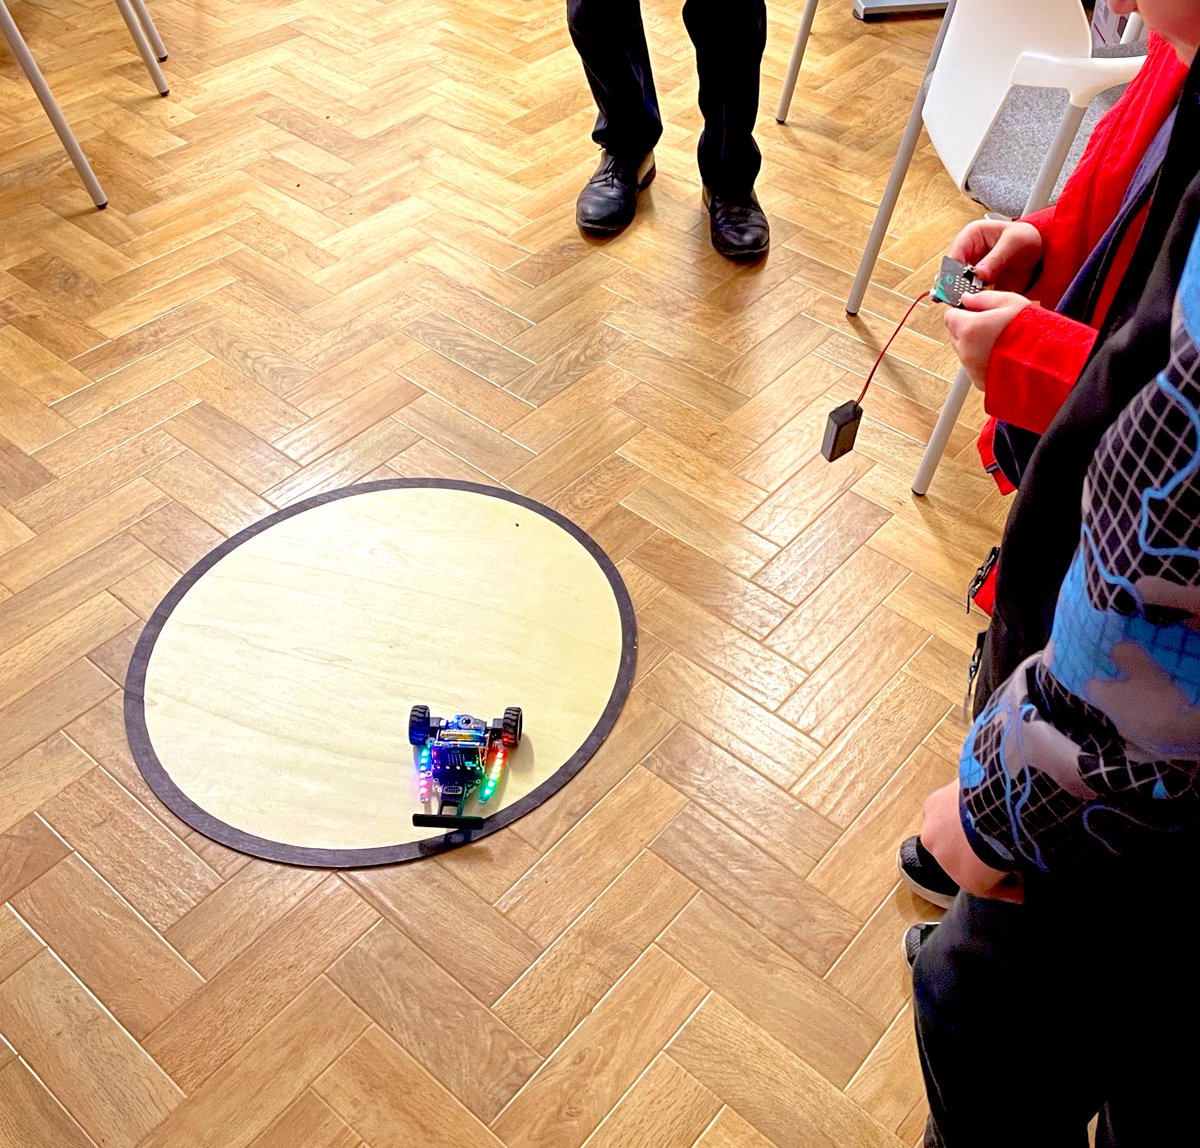 How lucky are we to have an incredible makerspace at our local library… the 9yo has been enjoying a weekly robot coding club for free, coding with and learning from secondary school children and absolutely loving it #lovelibraries #stem @penarthlibrary